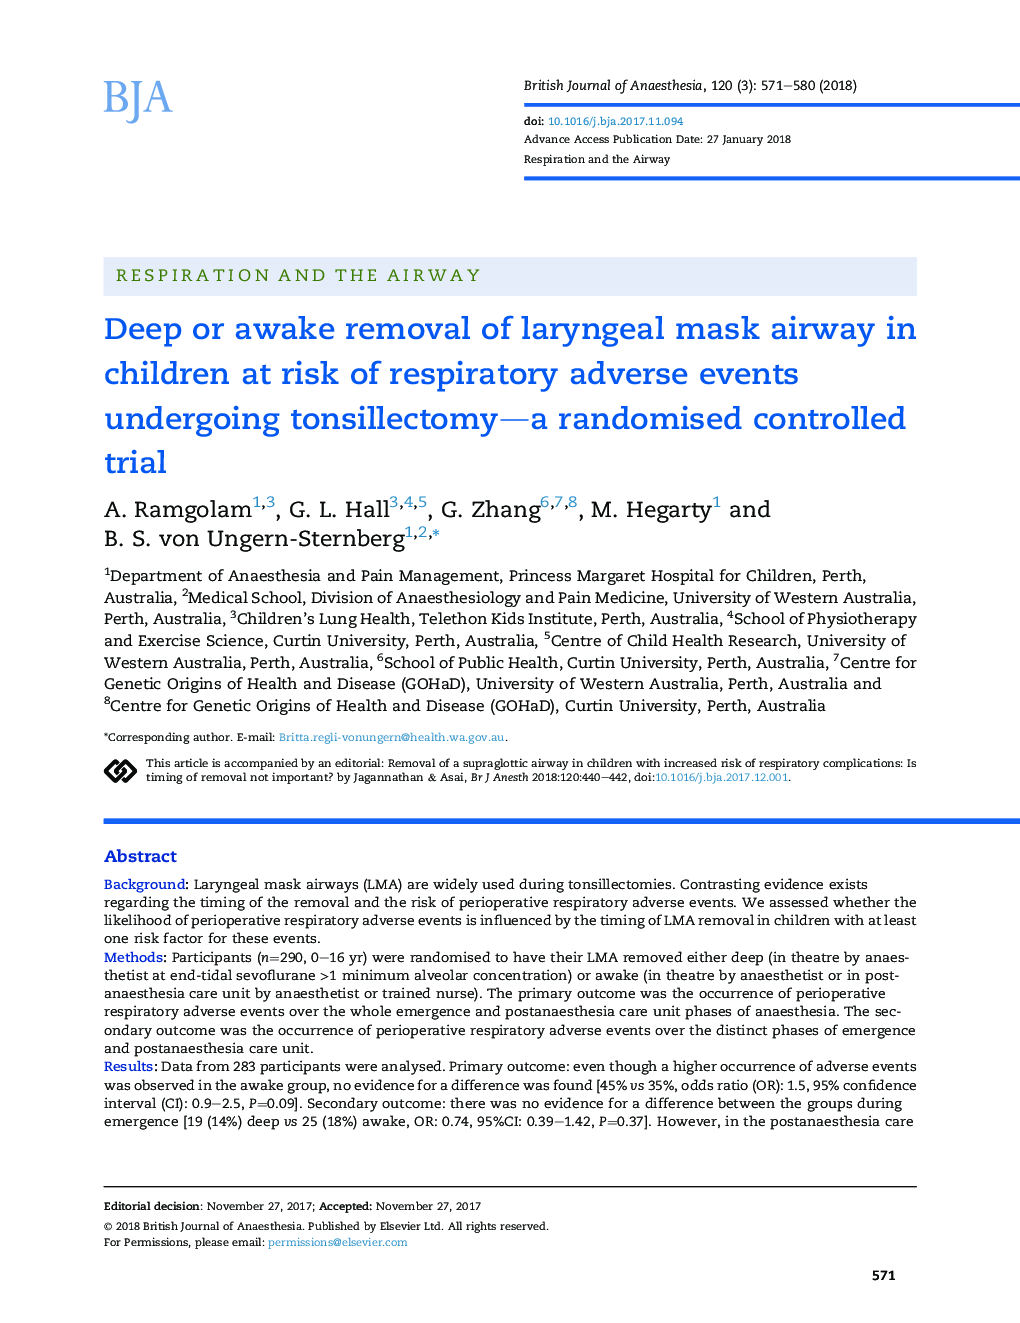 Deep or awake removal of laryngeal mask airway in children at risk of respiratory adverse events undergoing tonsillectomy-a randomised controlled trial